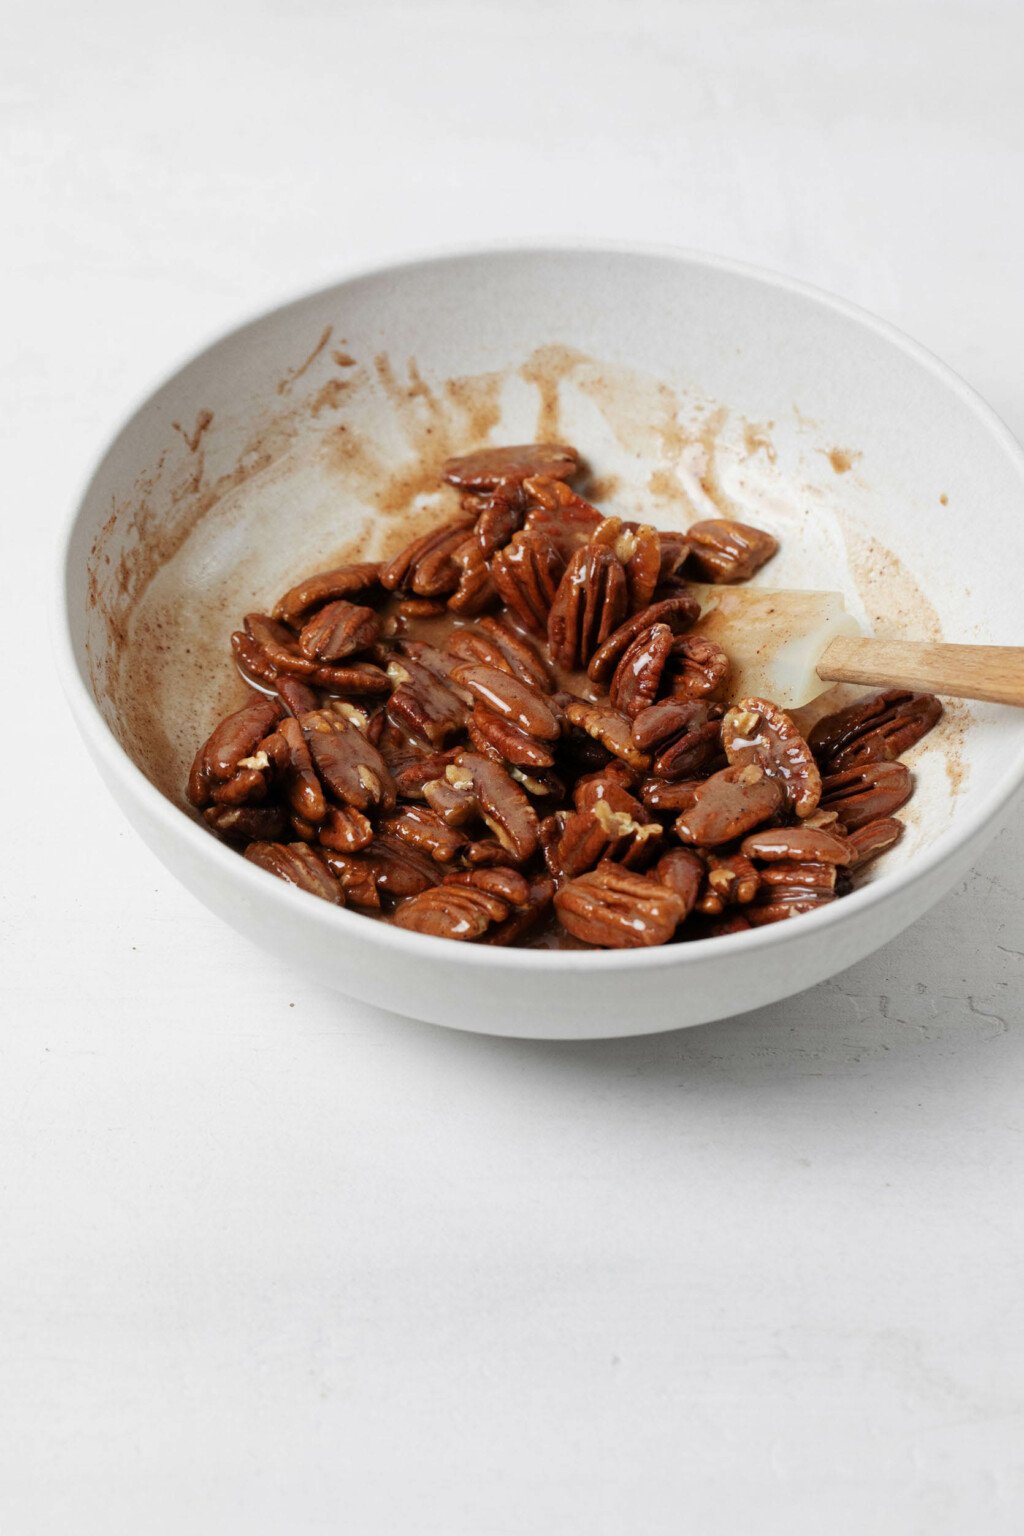 Pecan halves are being mixed with a sugary, liquid coating for baking in the oven. They're in a white mixing bowl that's resting on a white surface.